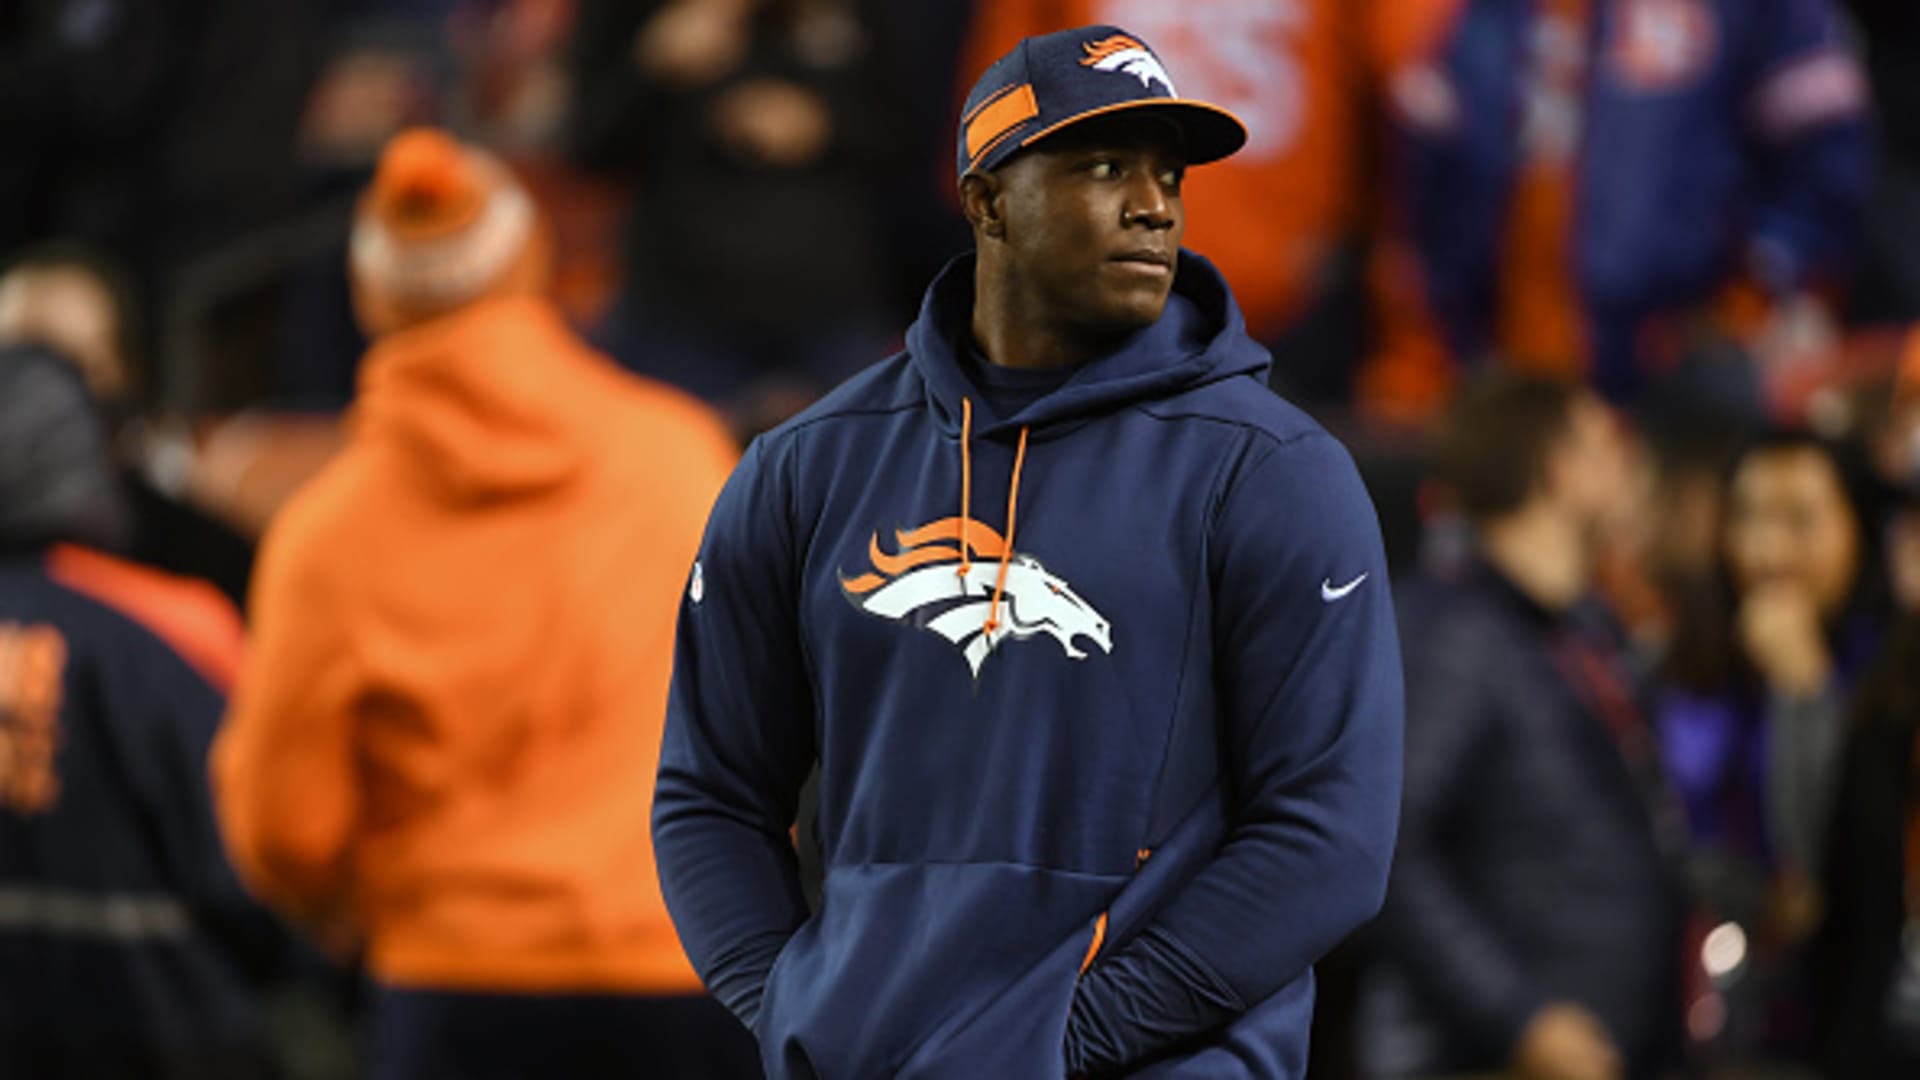 Former Bronco DeMarcus Ware on the sidelines before the game as the Denver Broncos played the Cleveland Browns at Broncos Stadium at Mile High.